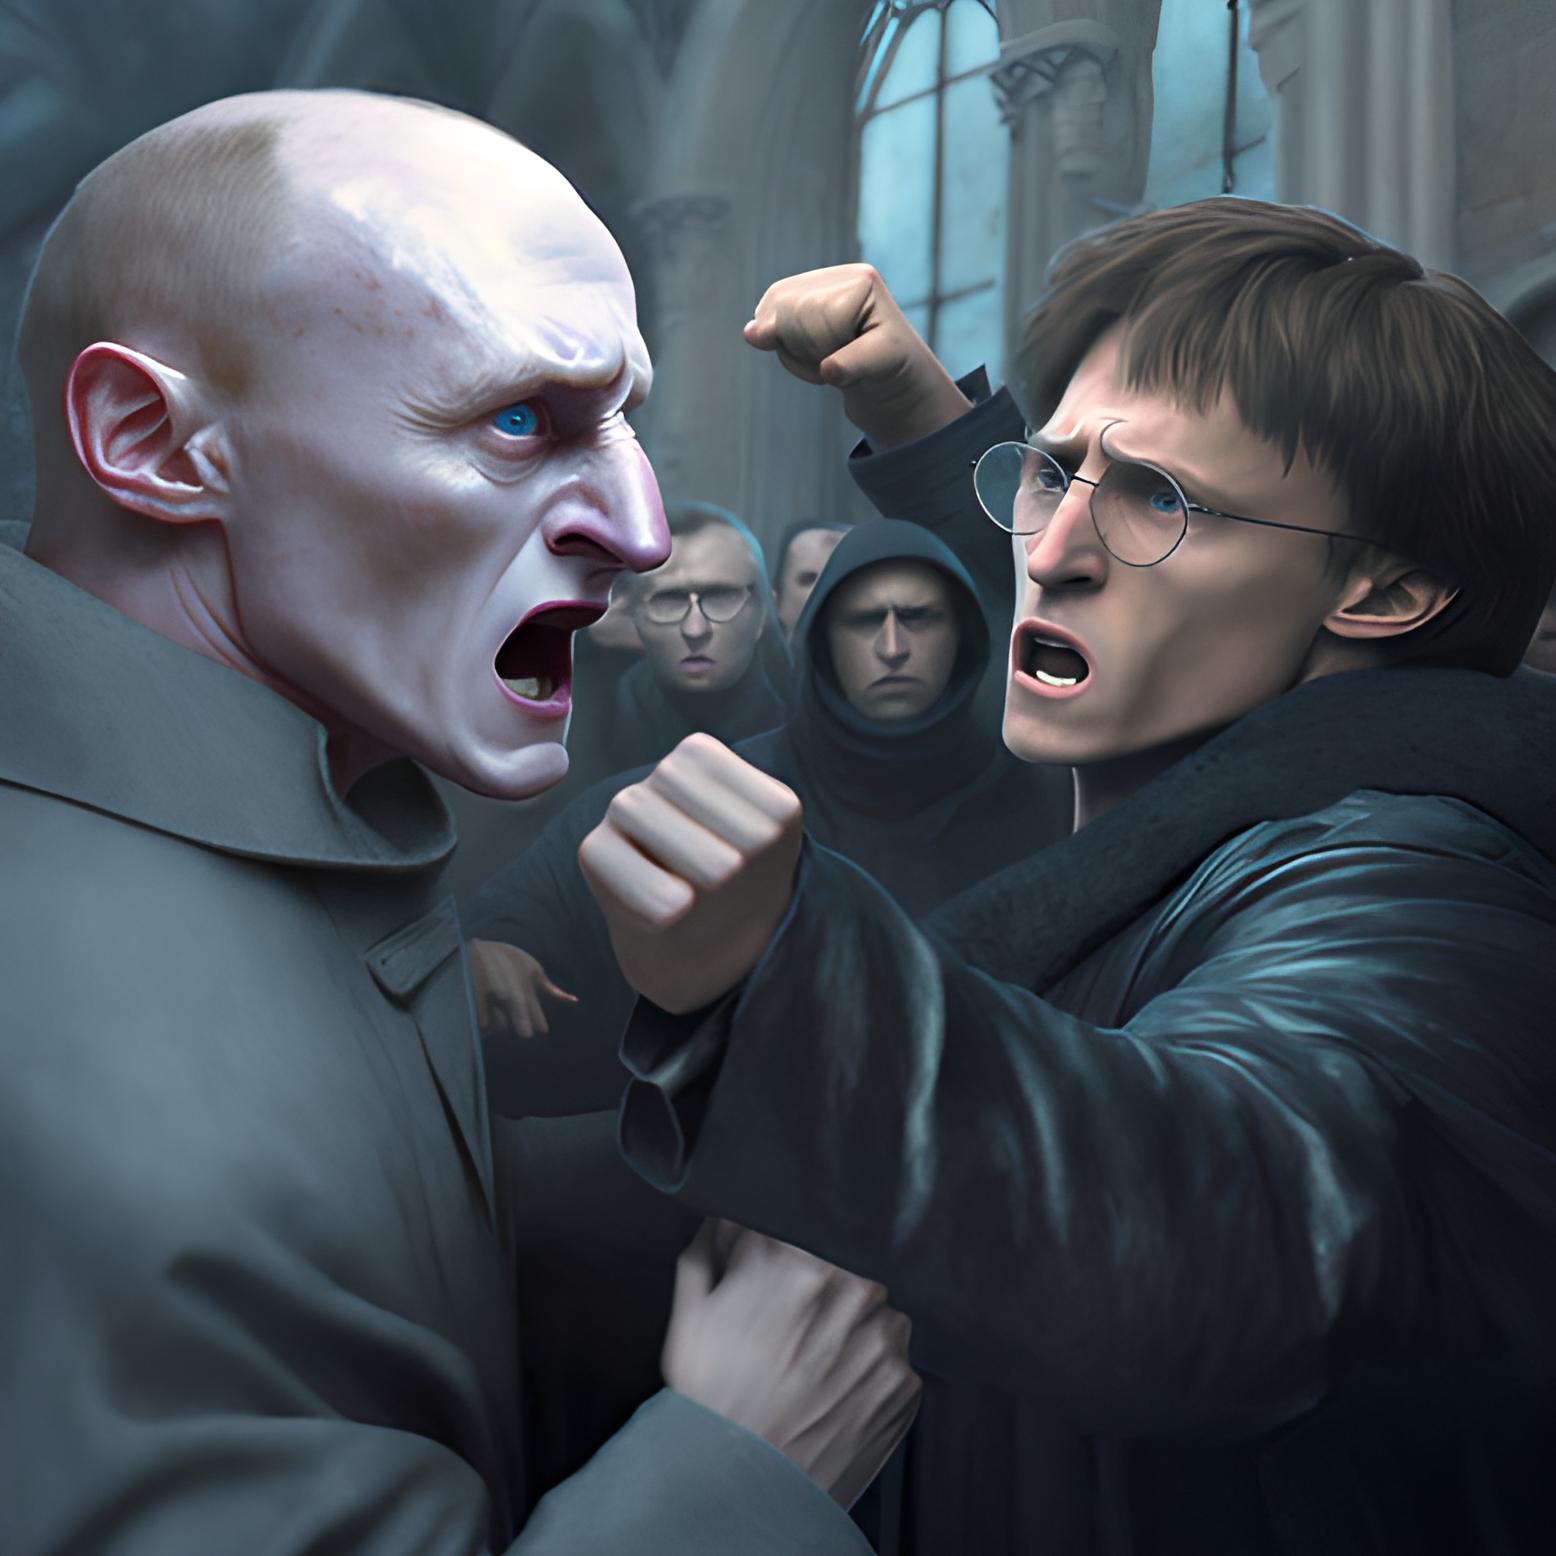 harry potter fights with putin who is depicted as evil cover image.